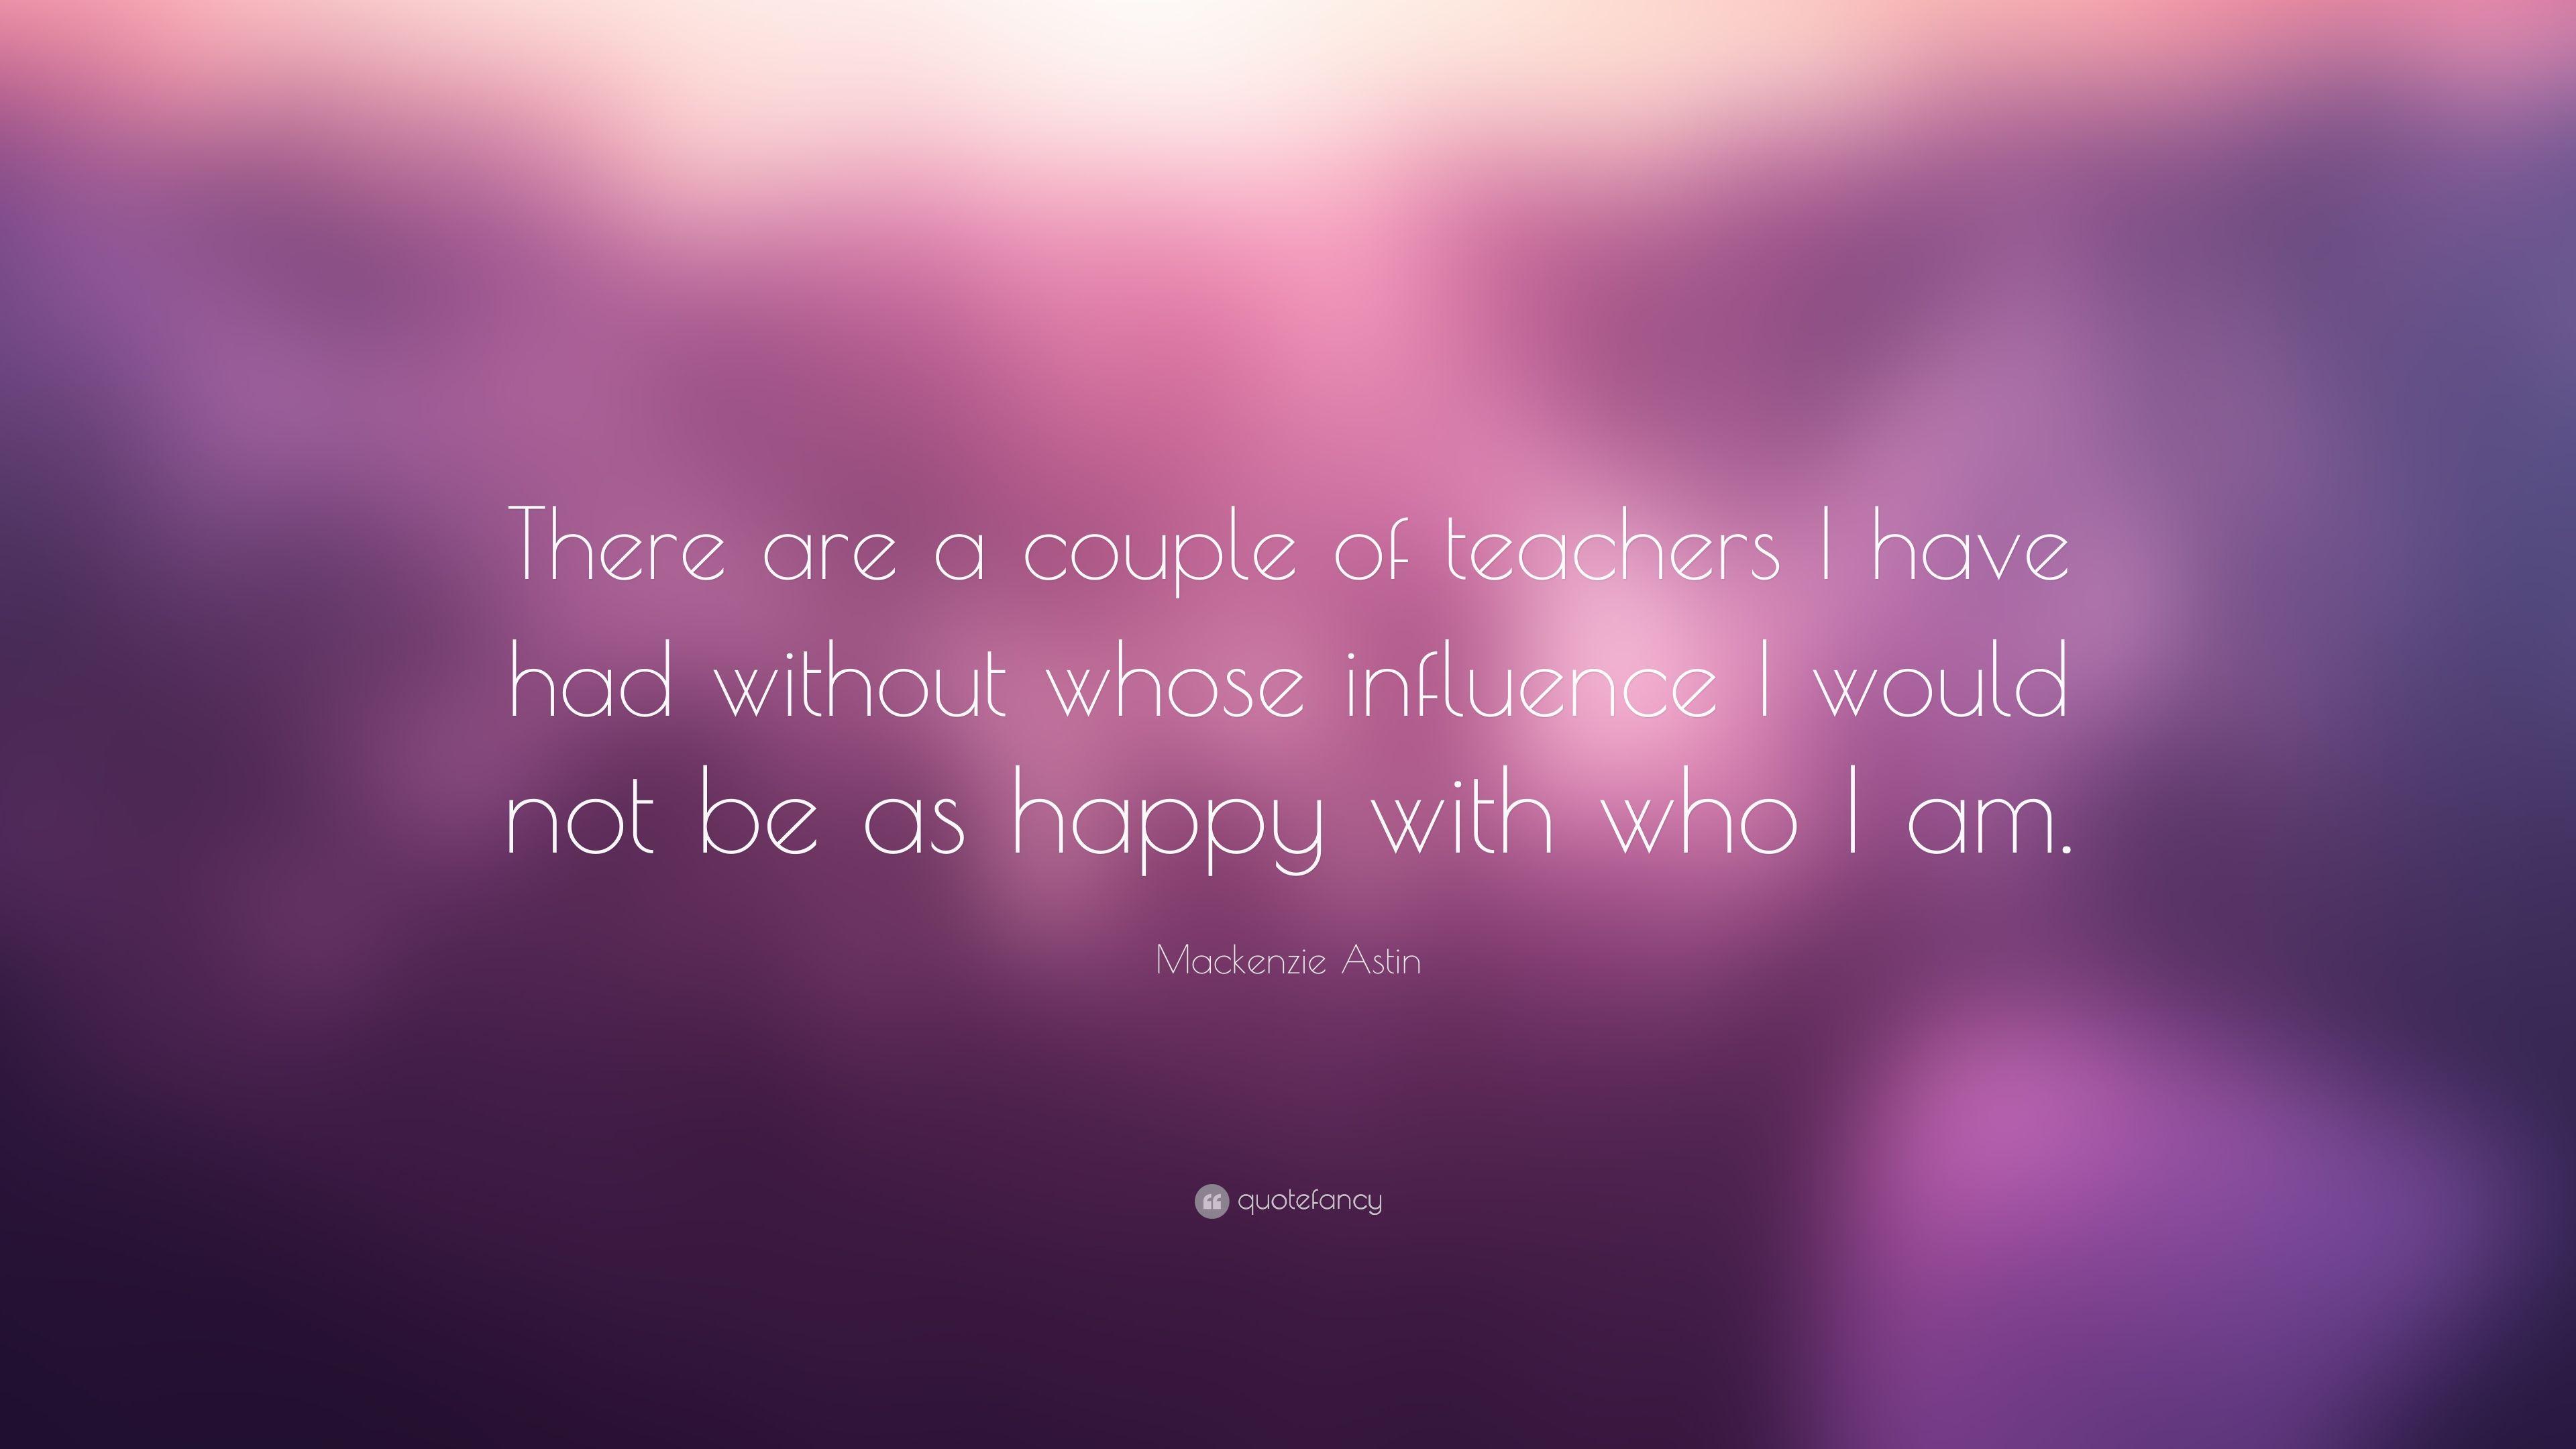 Mackenzie Astin Quote: “There are a couple of teachers I have had